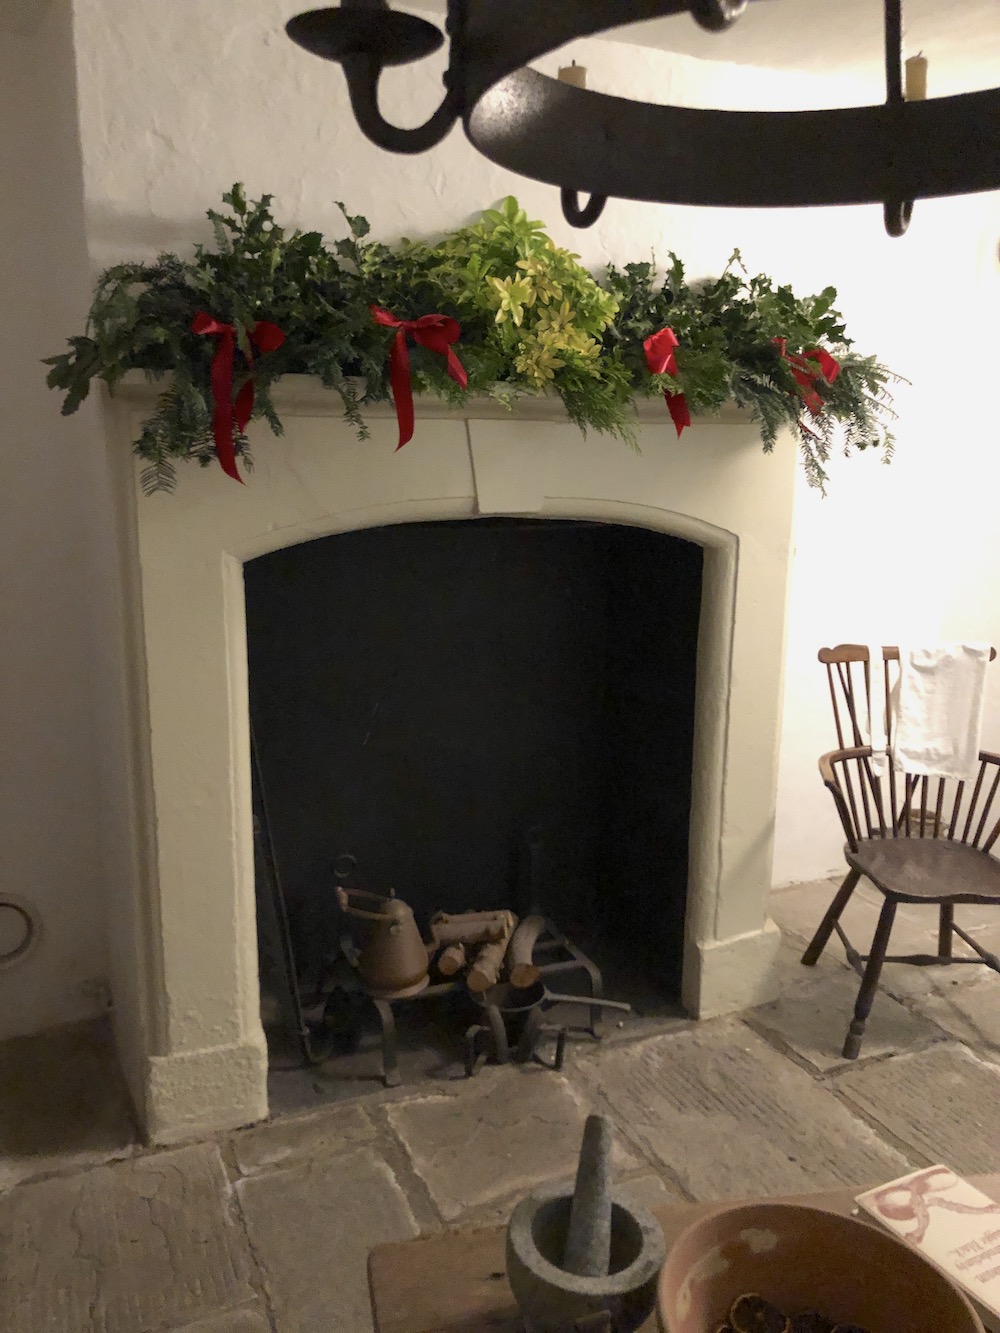 Christmas Decorations in the kitchen at Charles Wesley's house